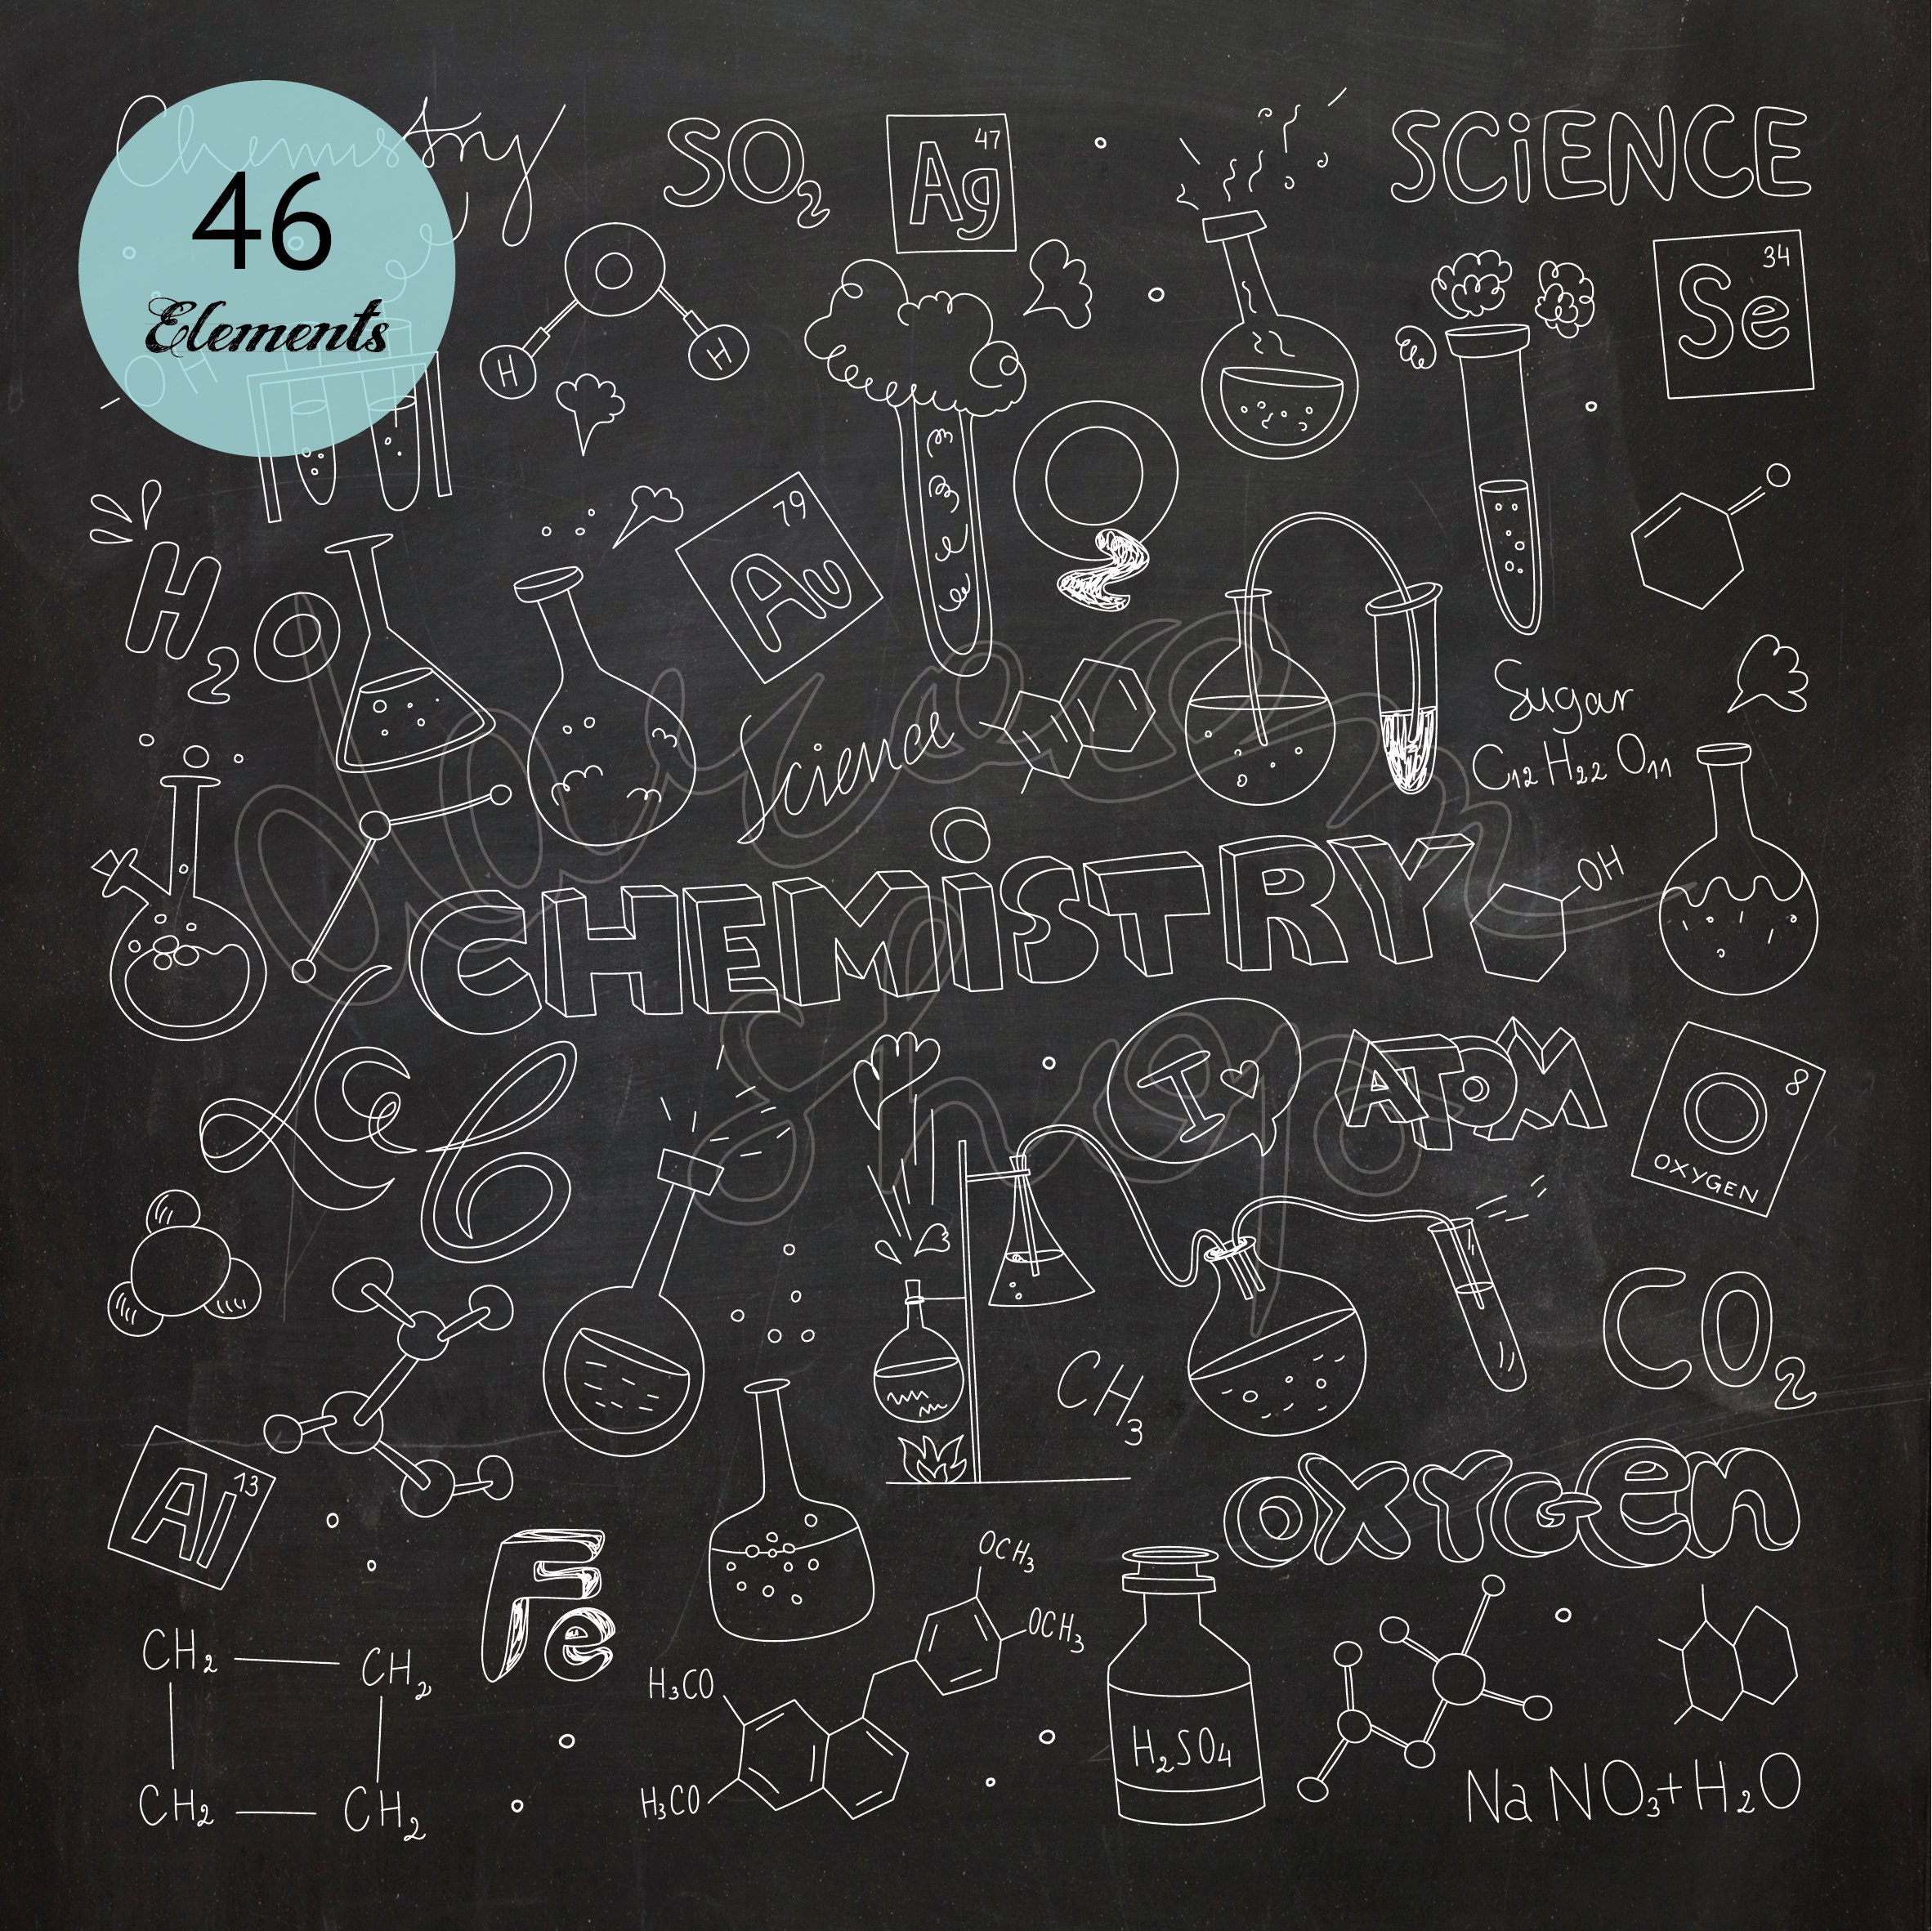 Organic Chemistry Stencil with Minor Cosmetic Defects - O-Chem Shop